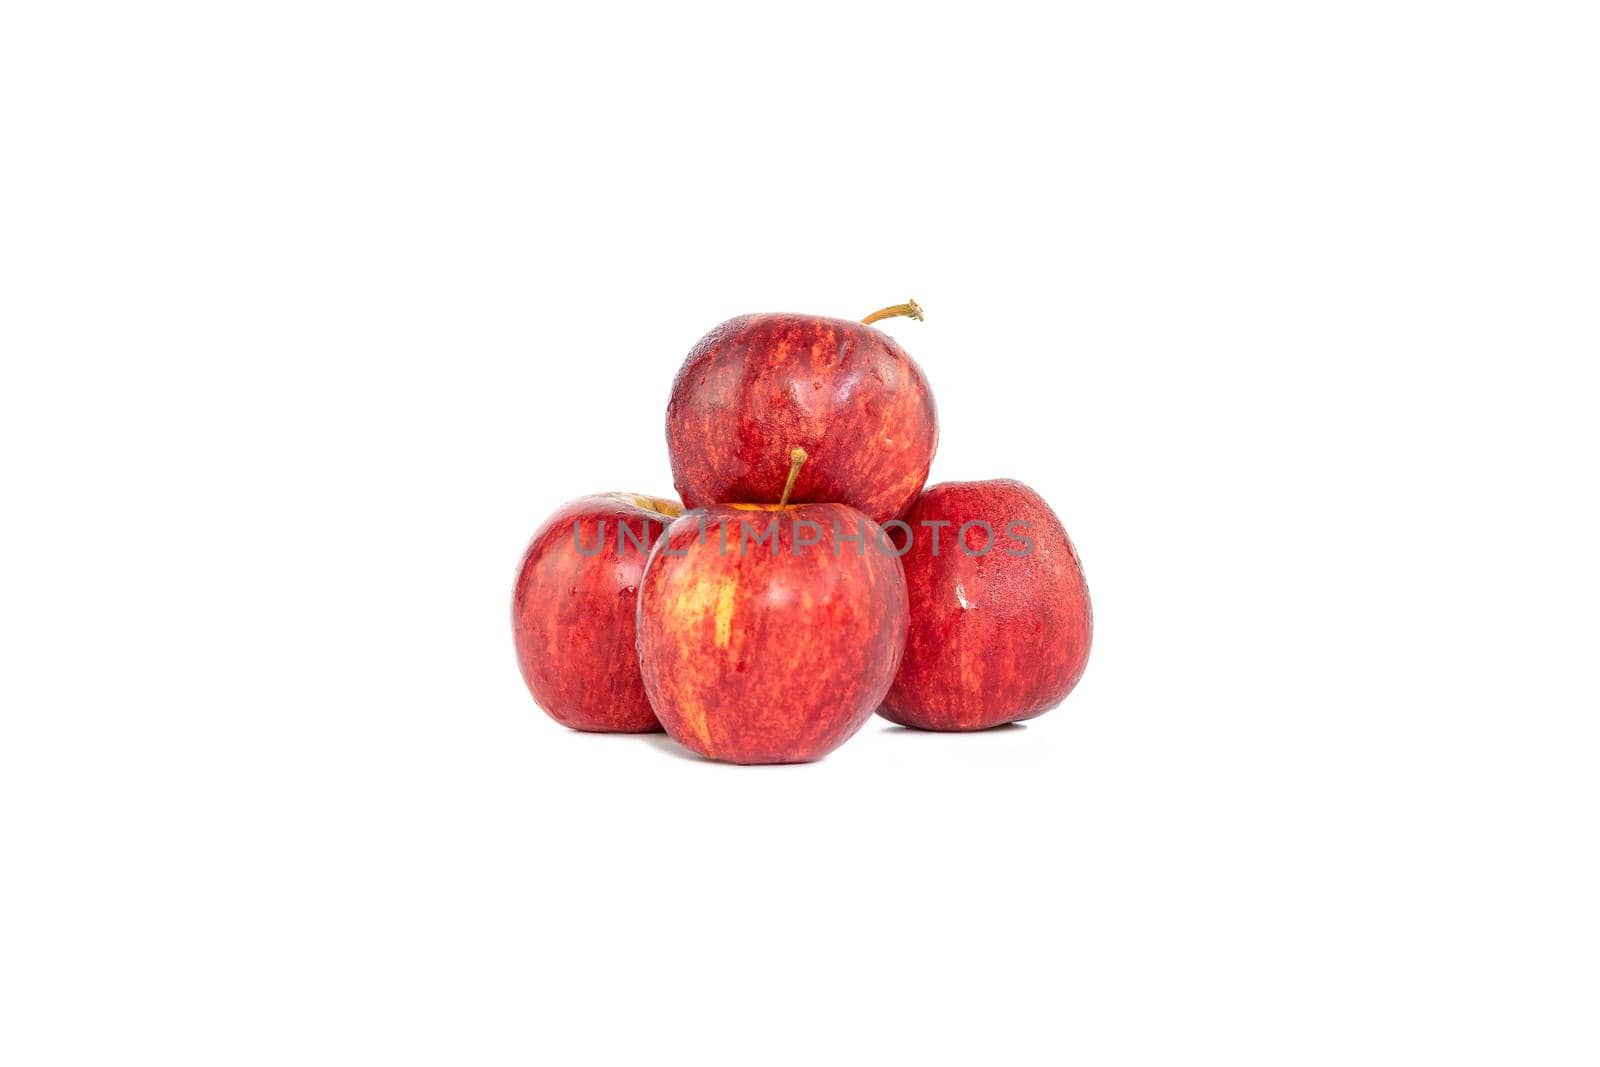 Group of red apples isolated on white background